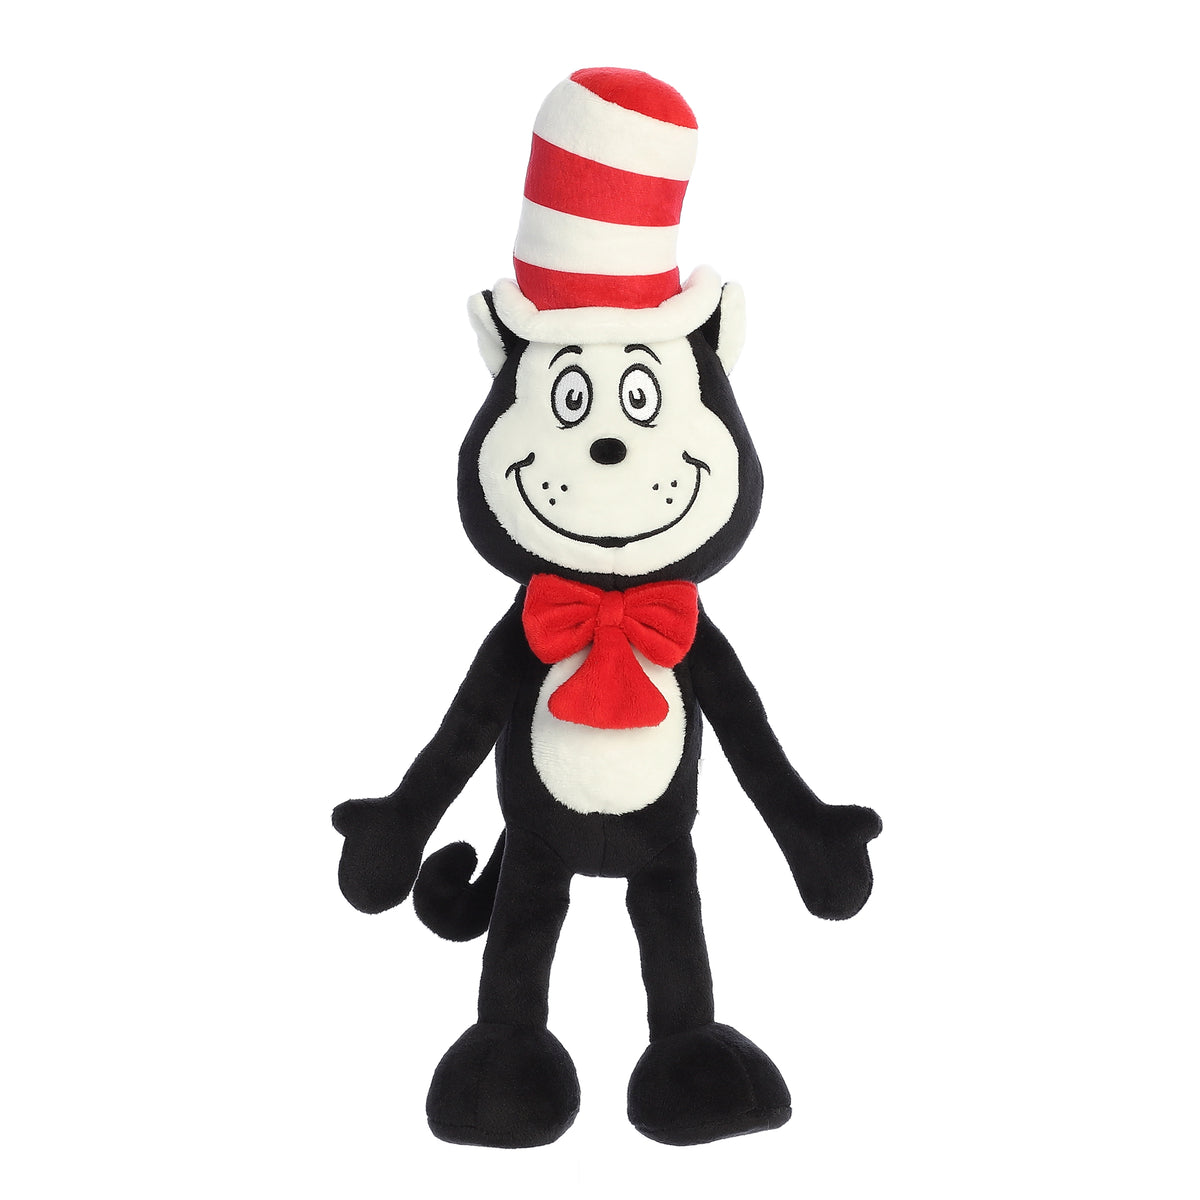 A playful Cat in the Hat armature that is the iconic black and white character with a red and white top hat and red bow tie.